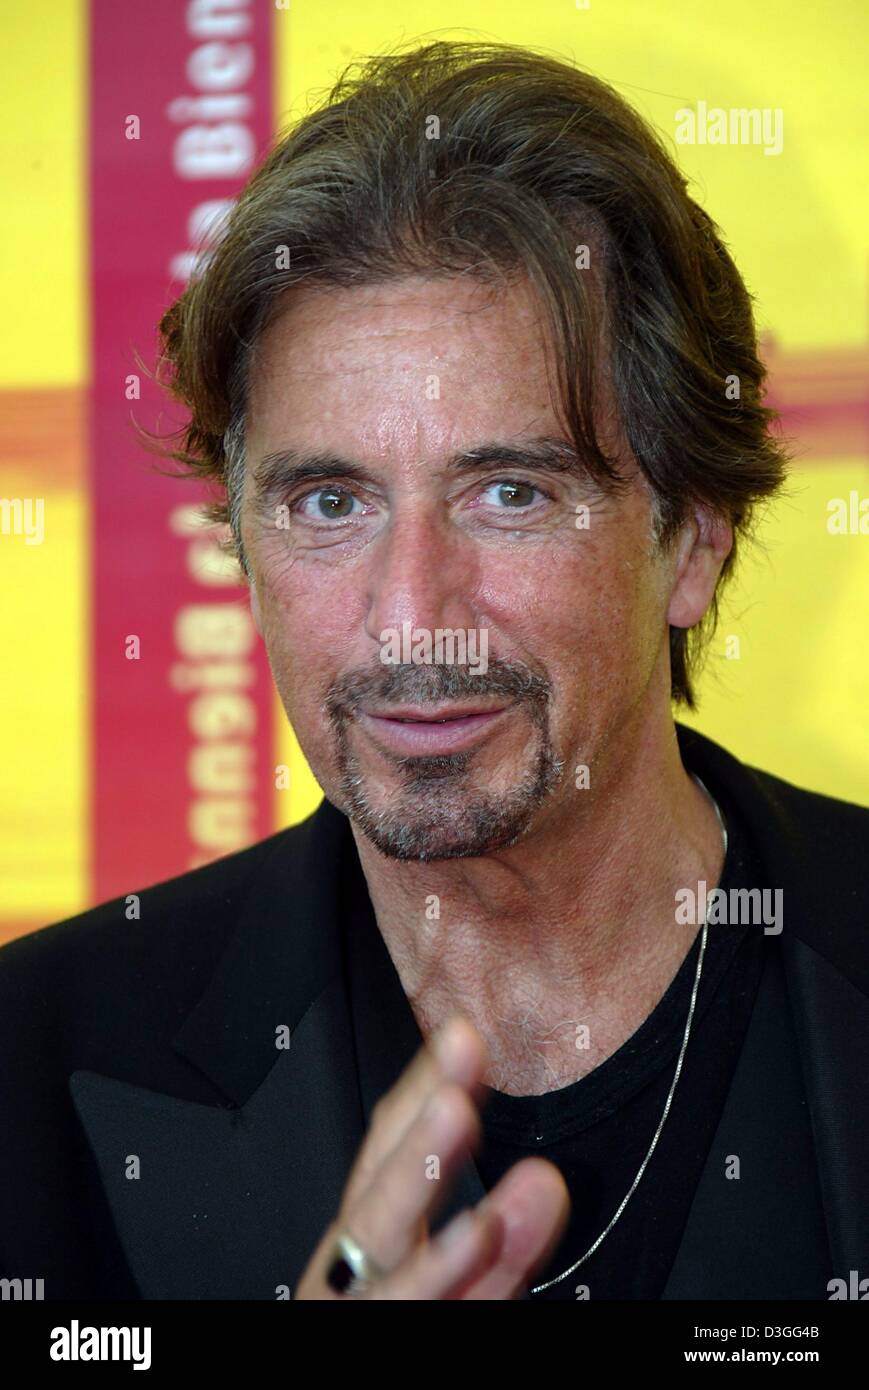 (dpa) - US actor Al Pacino gestures during a press conference for his film 'The Merchant of Venice', which runs out of competition at the 61st Venice Film Festival, Italy, 4 September 2004. Stock Photo